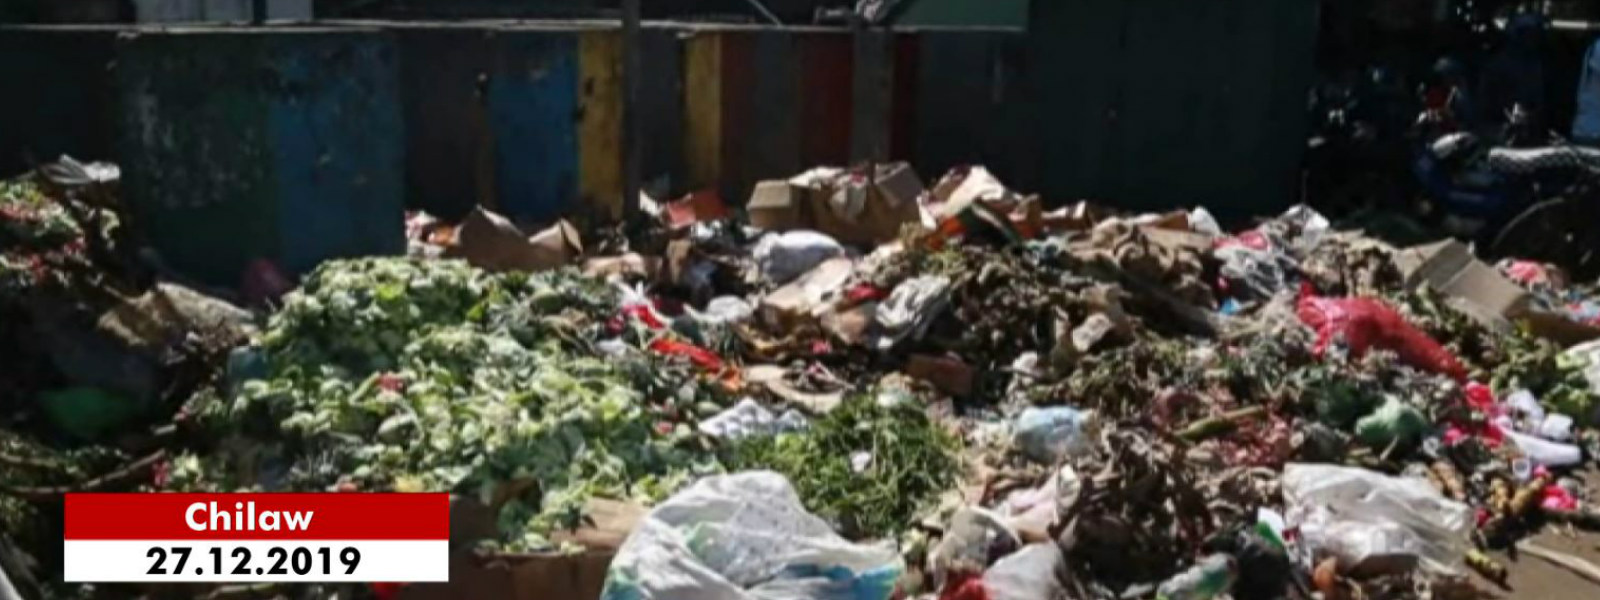 Garbage piled up in Chilaw affects area residents